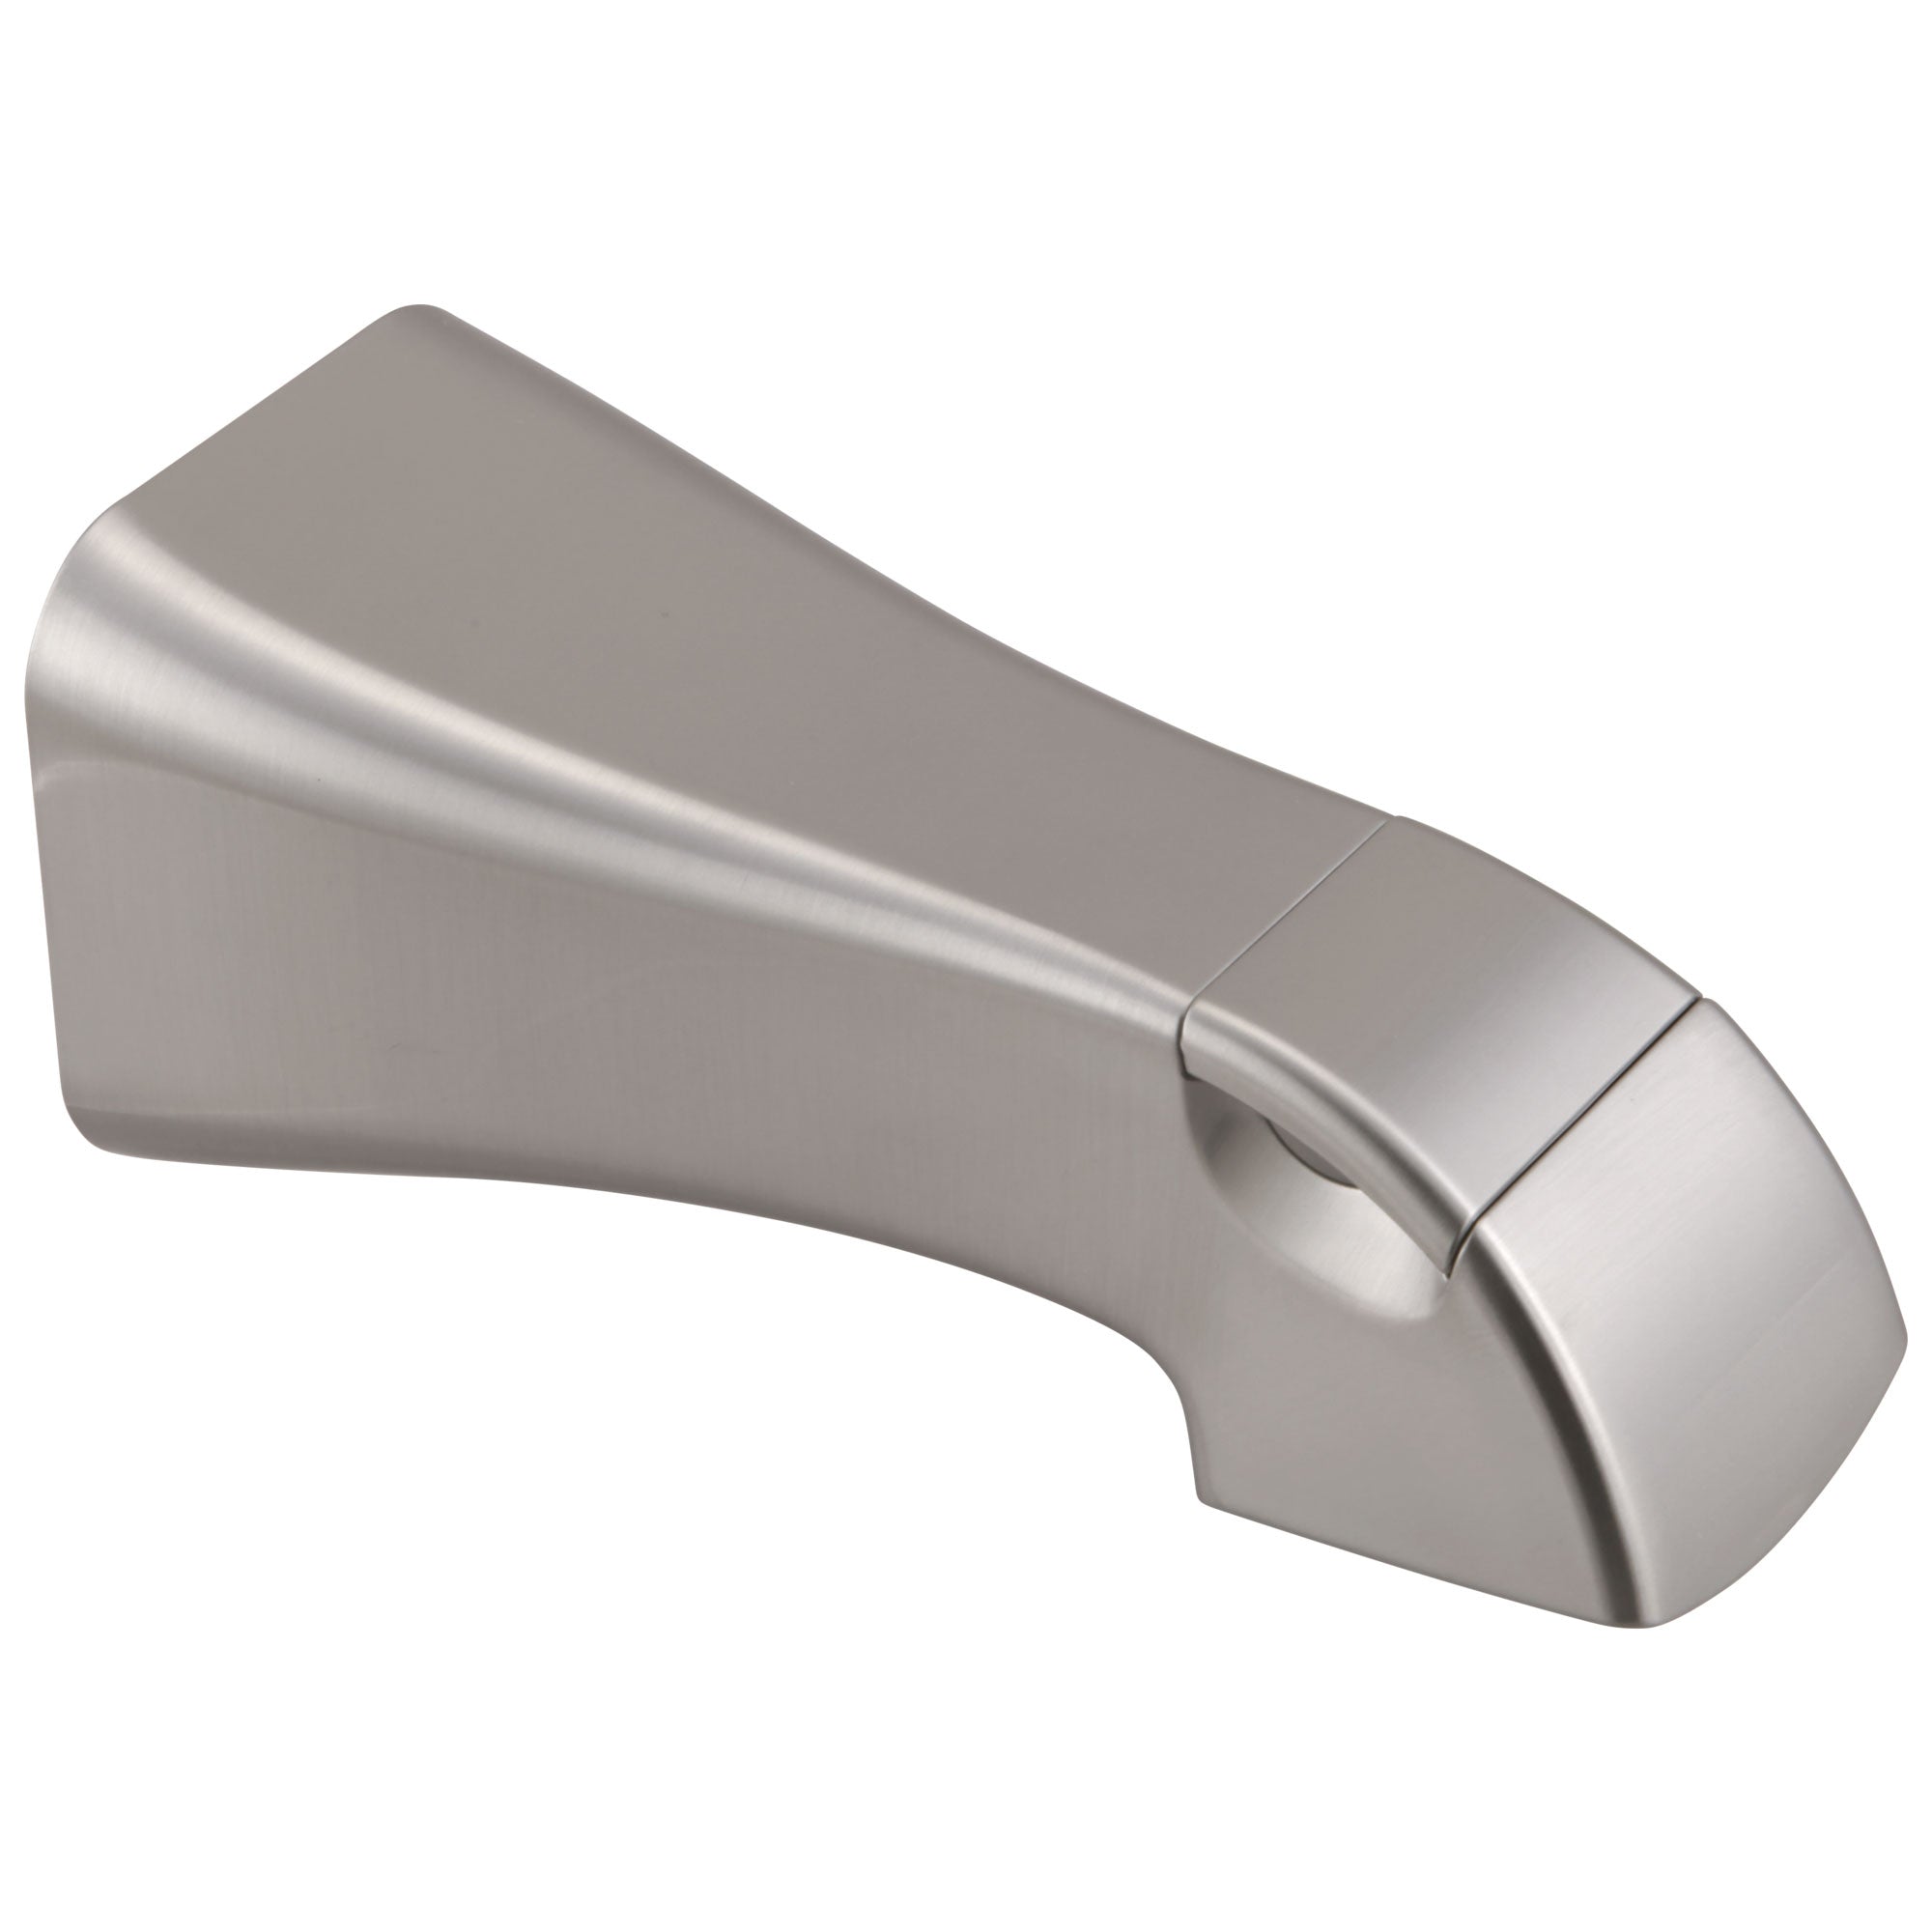 Delta Tesla Collection Stainless Steel Finish Wall Mounted Modern Pull-Up Diverter Bath Tub Spout DRP78735SS